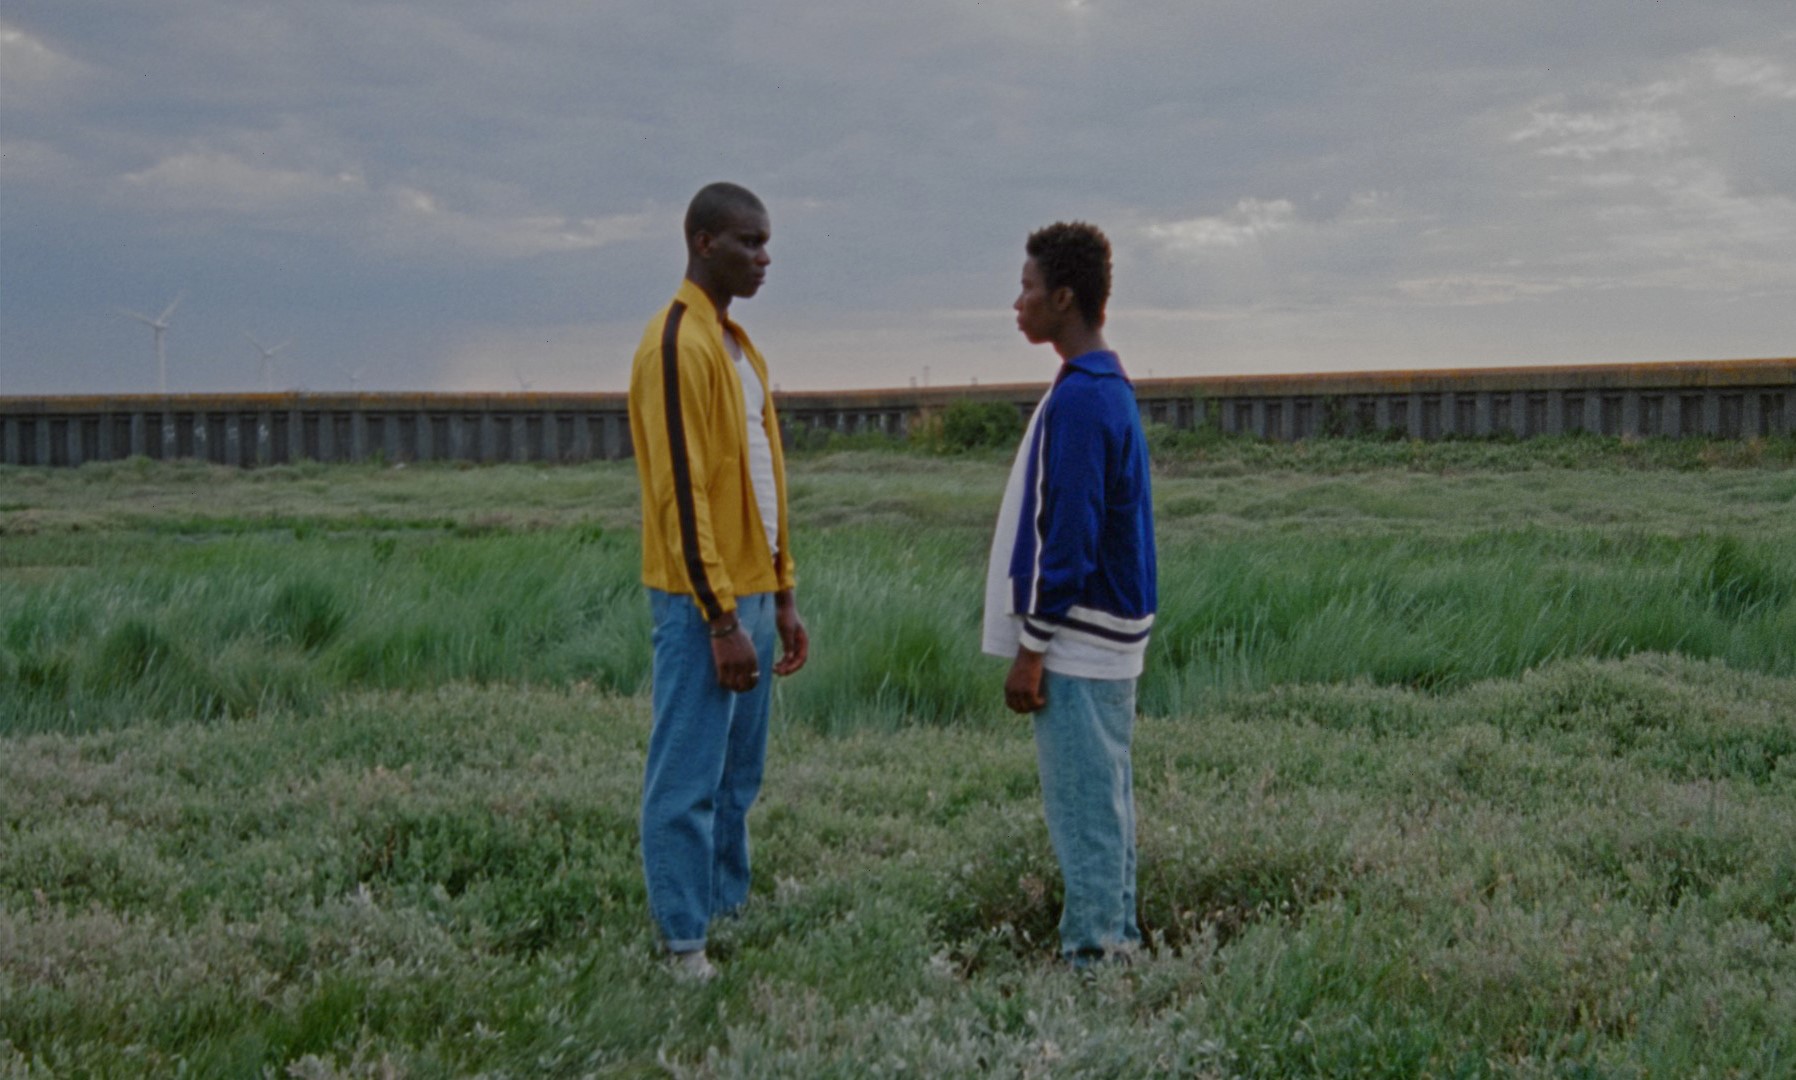 A still from a film by Iggy London. It shows two Black men, stood in a field, staring at each other's feet.